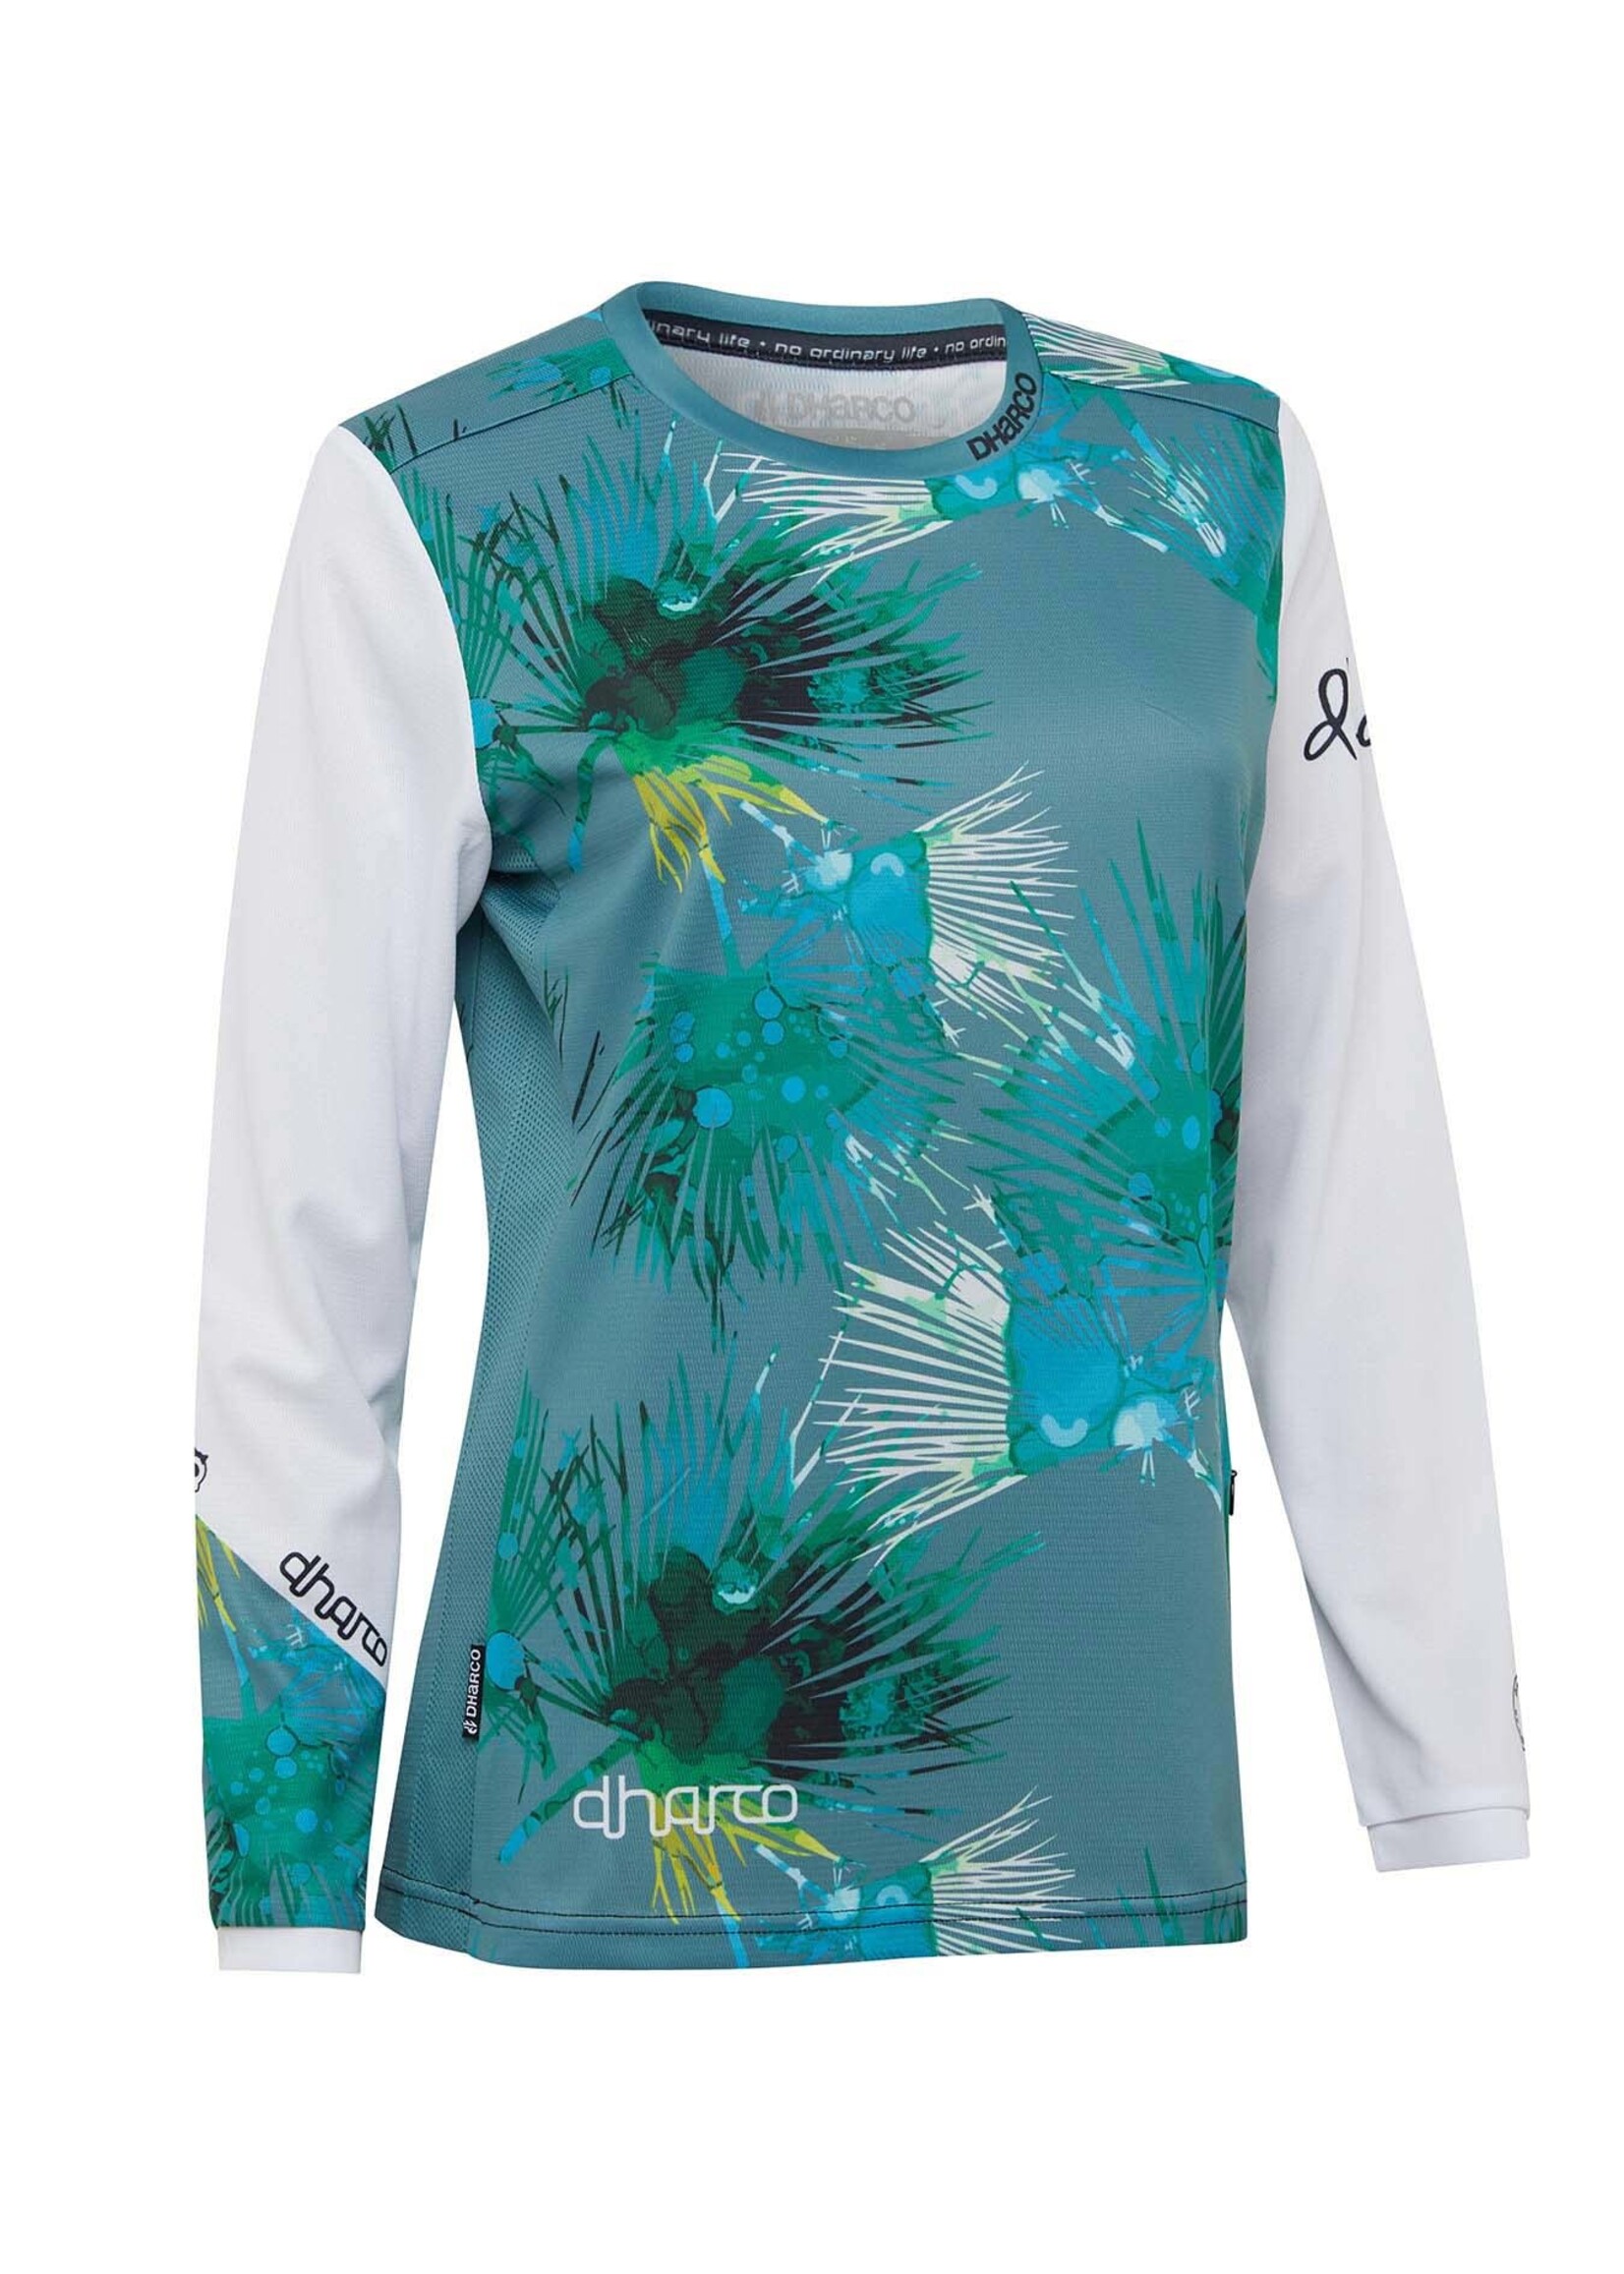 DHaRCO WOMENS GRAVITY JERSEY